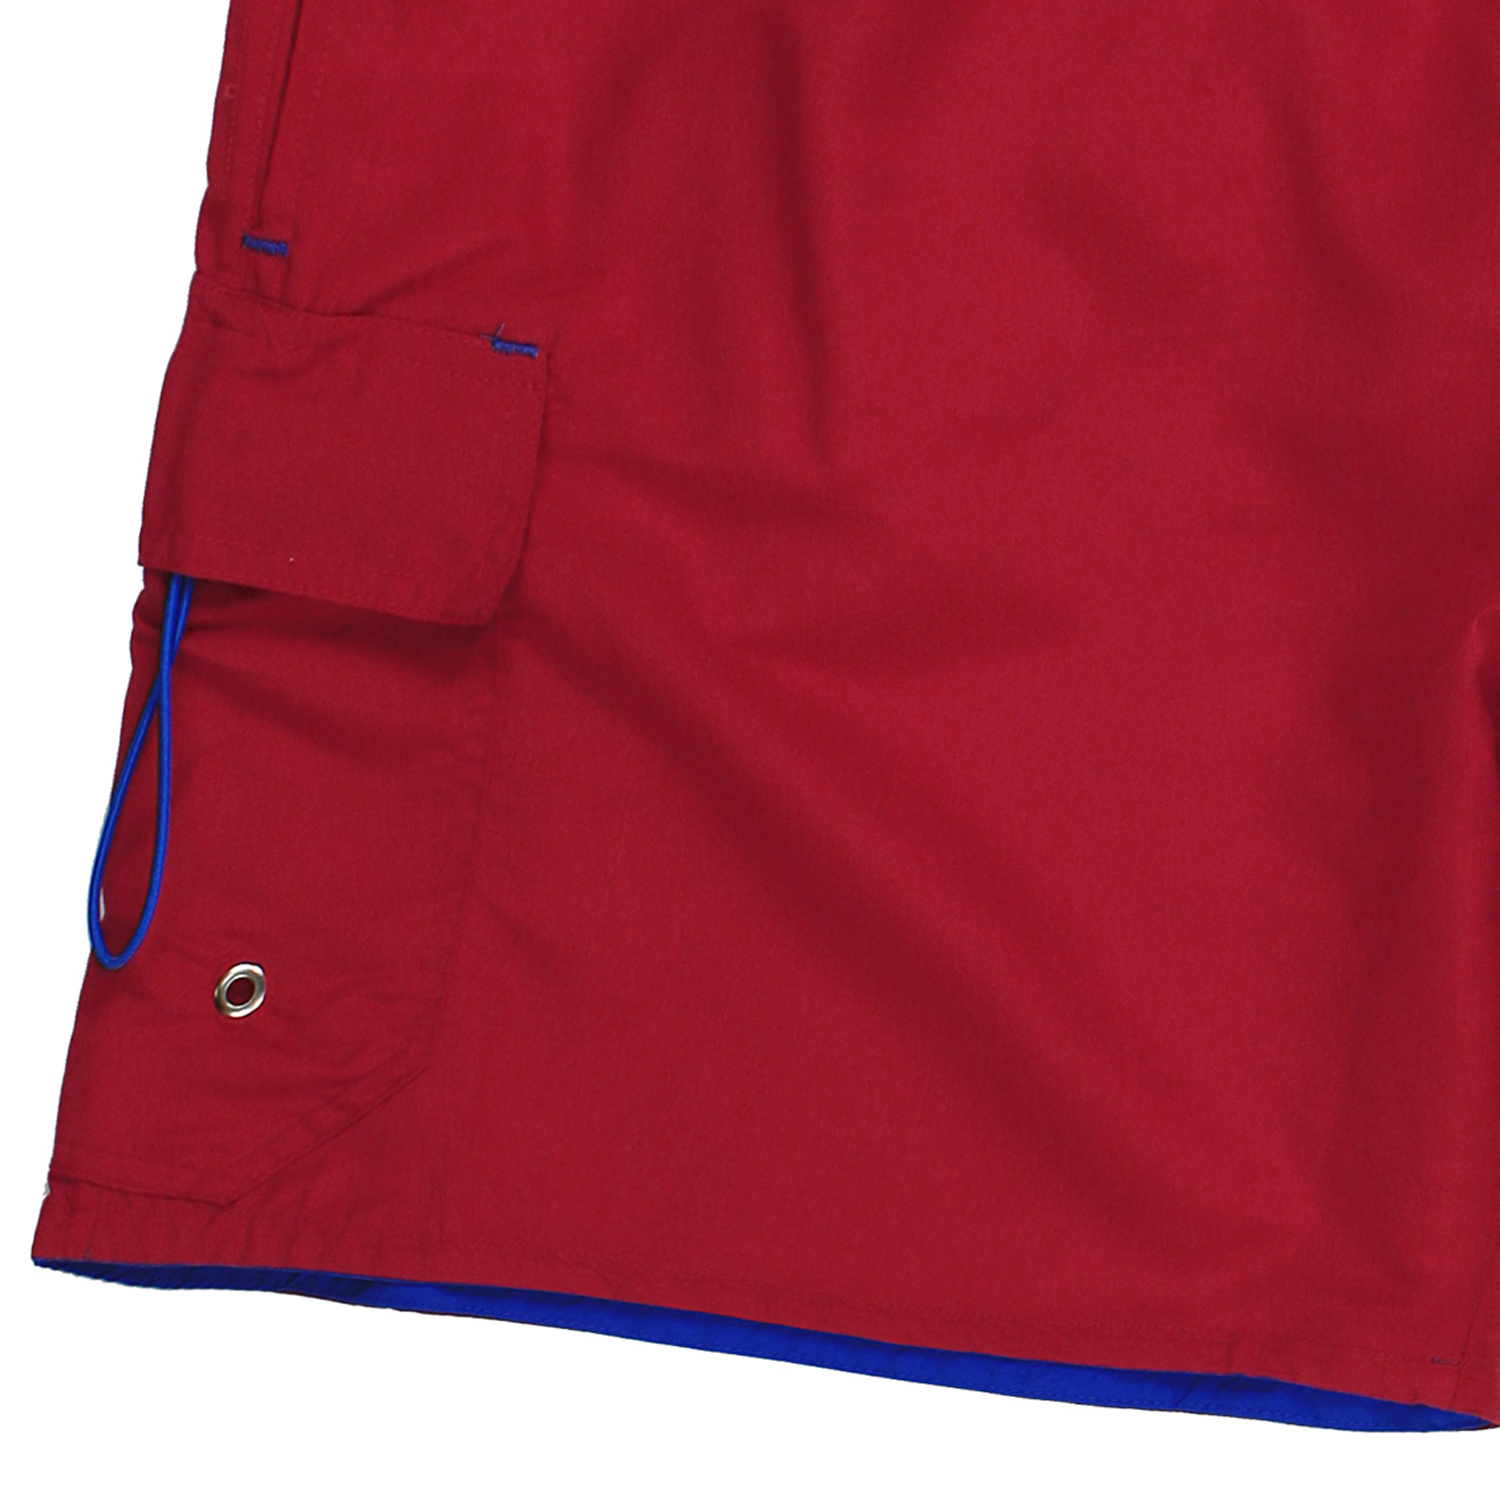 Swim shorts "Barbados" for men by Adamo in red up to oversize 10XL